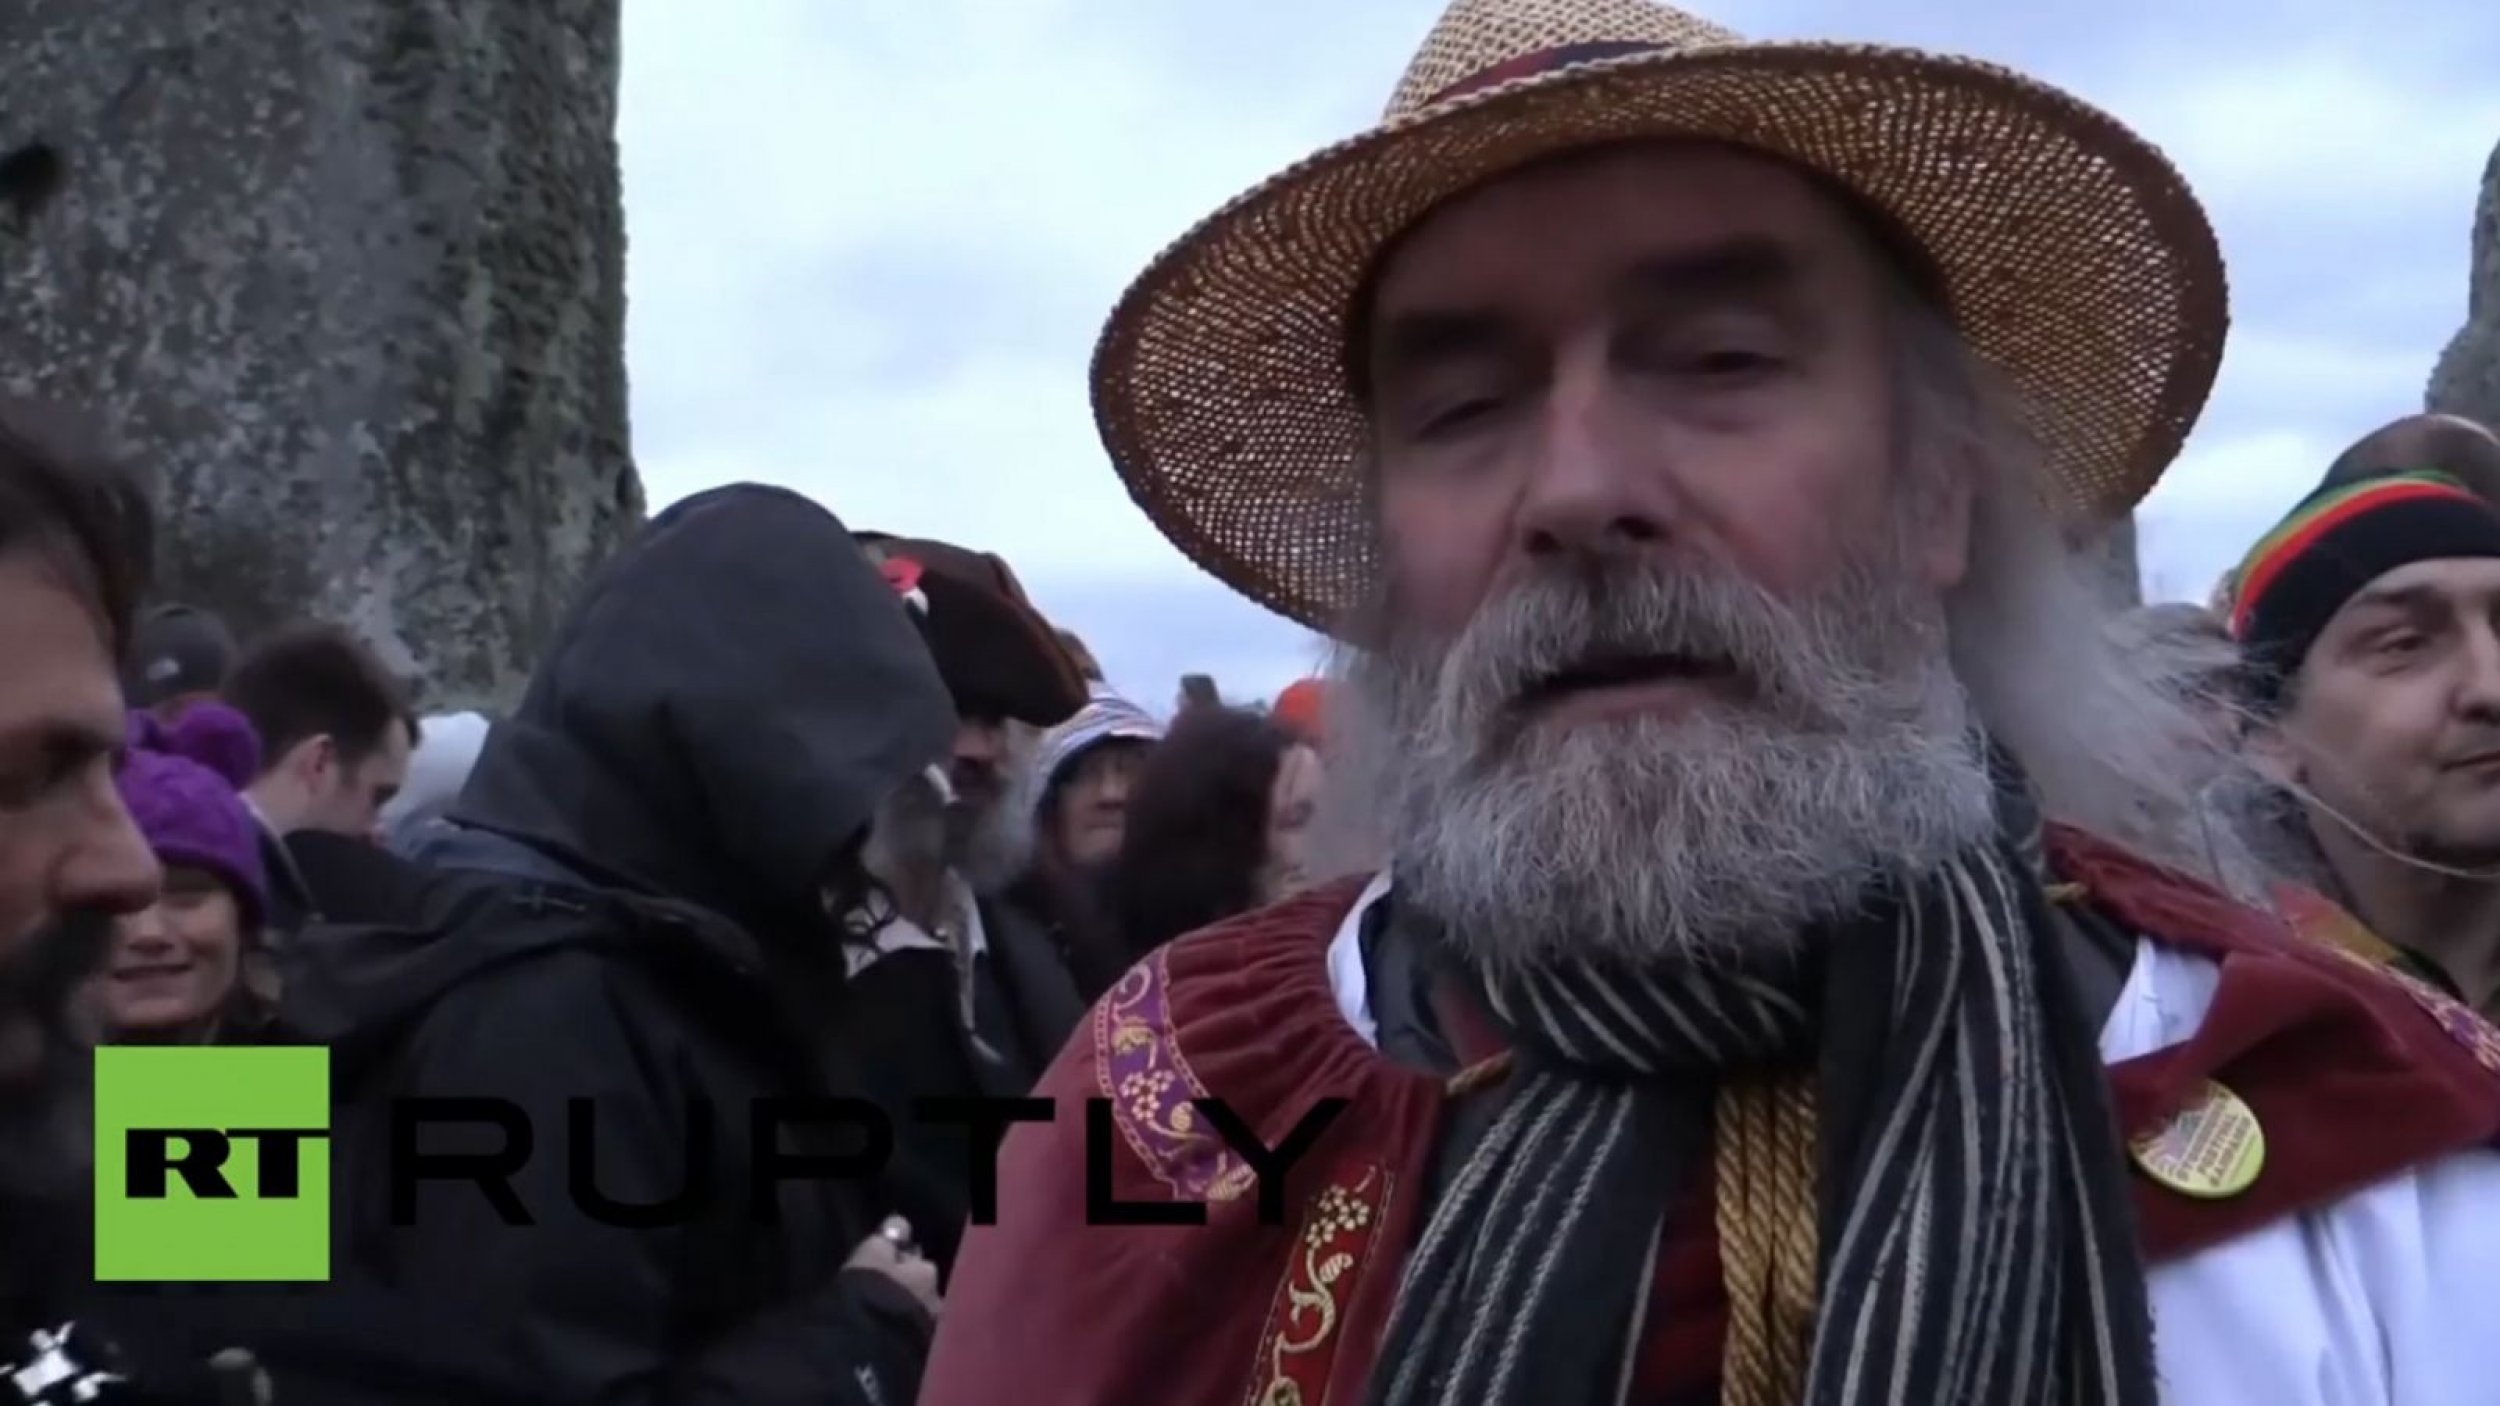 UK Pagans, Druids and Witches Gather at Stonehenge for Winter Solstice